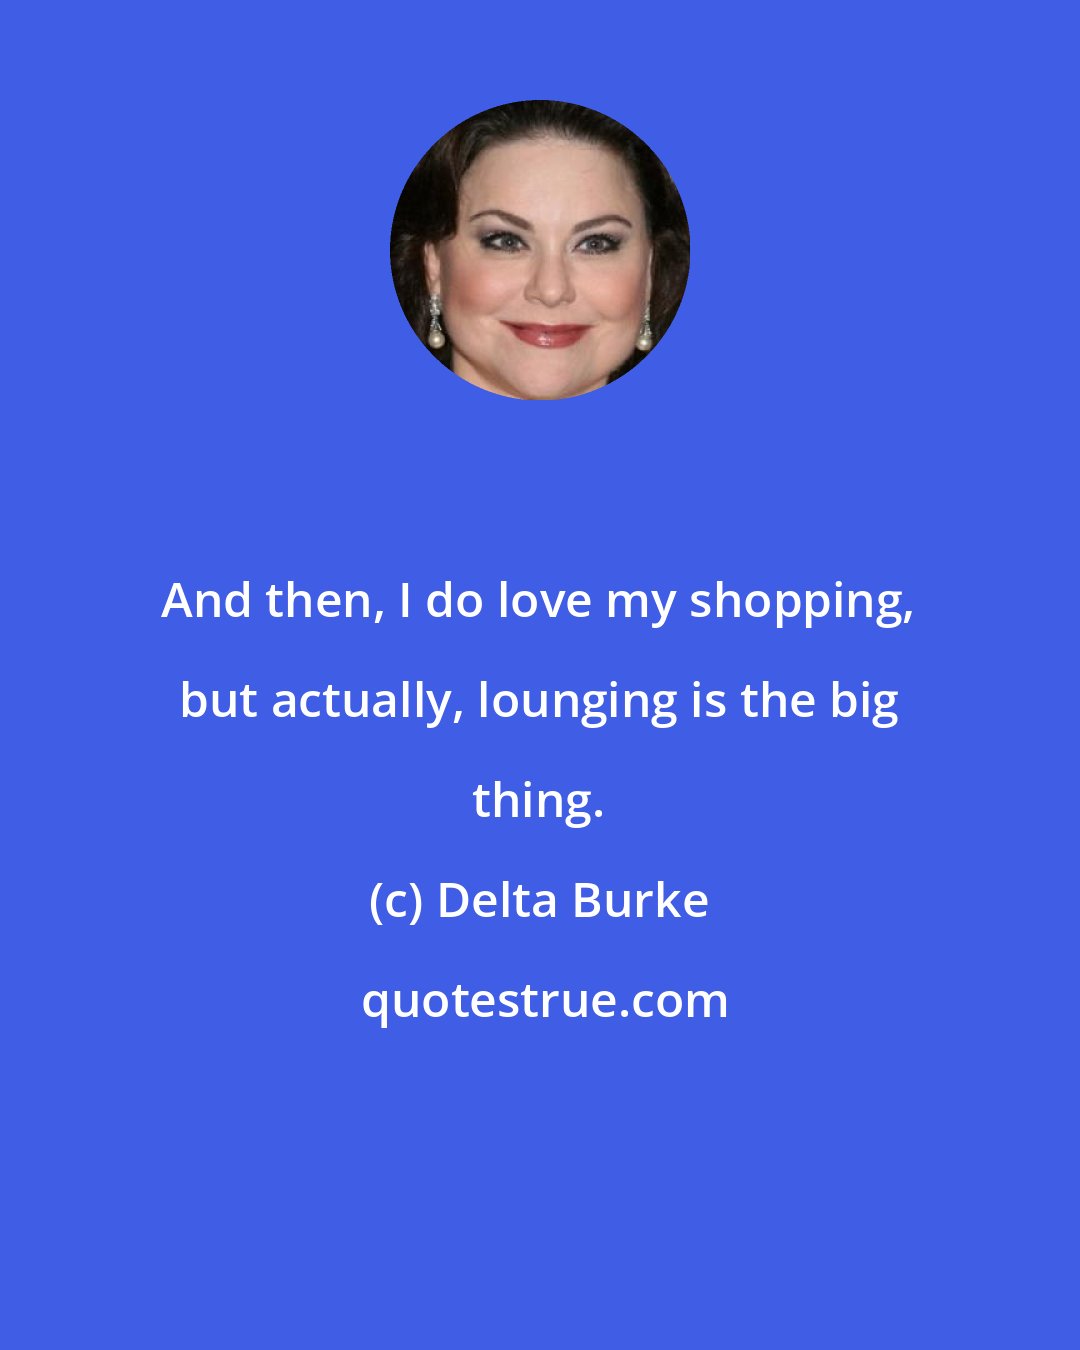 Delta Burke: And then, I do love my shopping, but actually, lounging is the big thing.